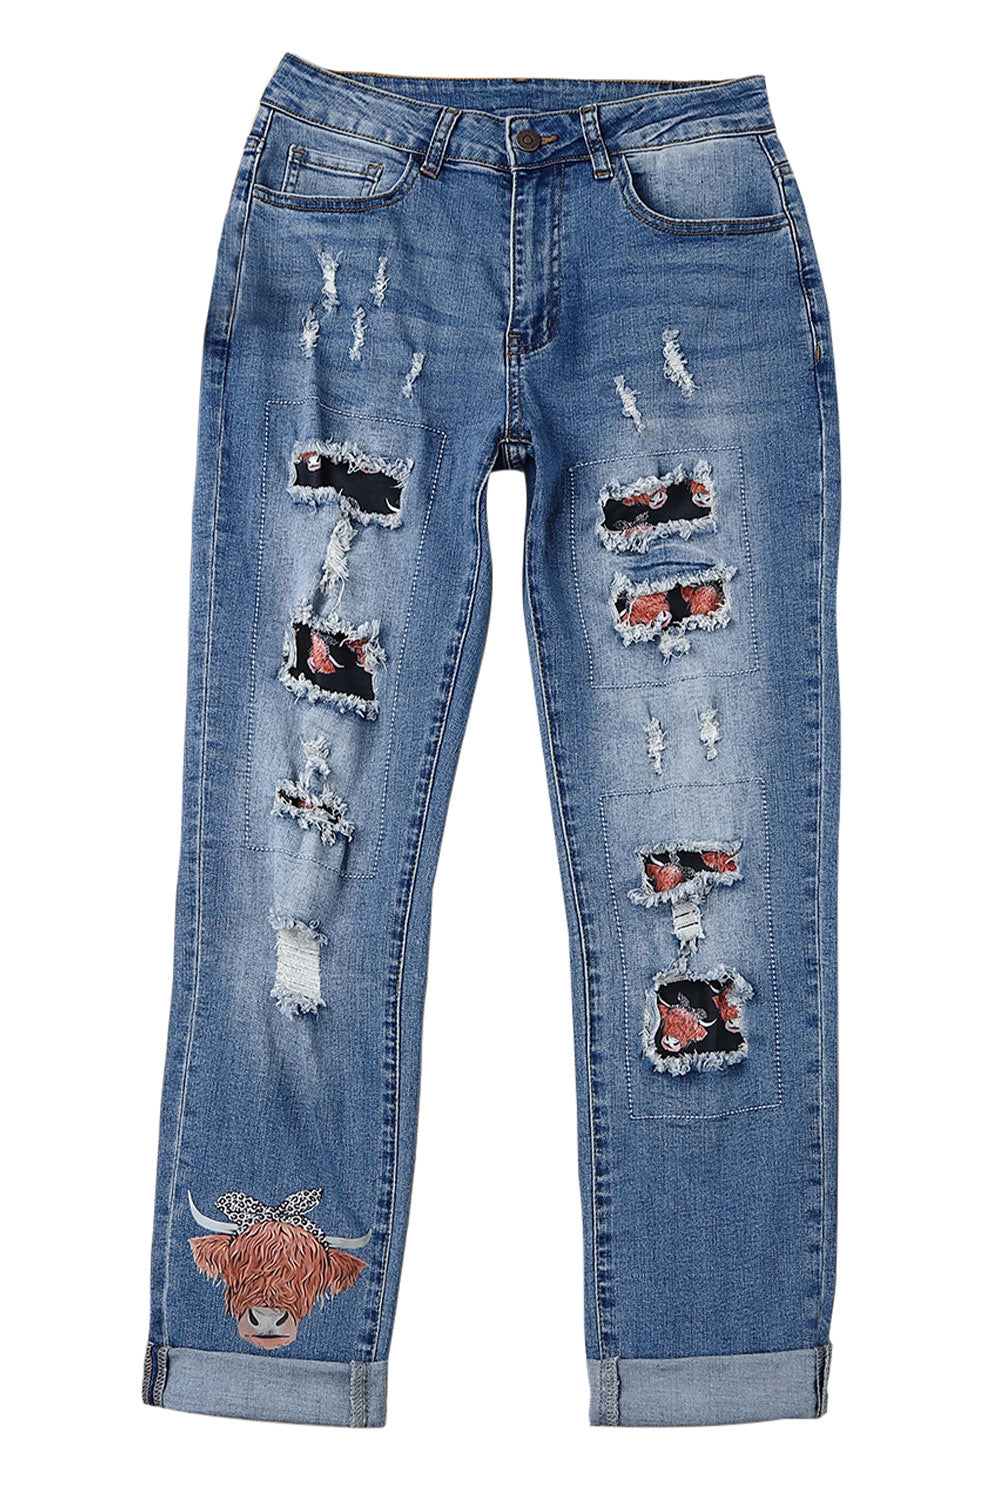 Blue Animal Print Ripped Straight Leg Graphic Jeans